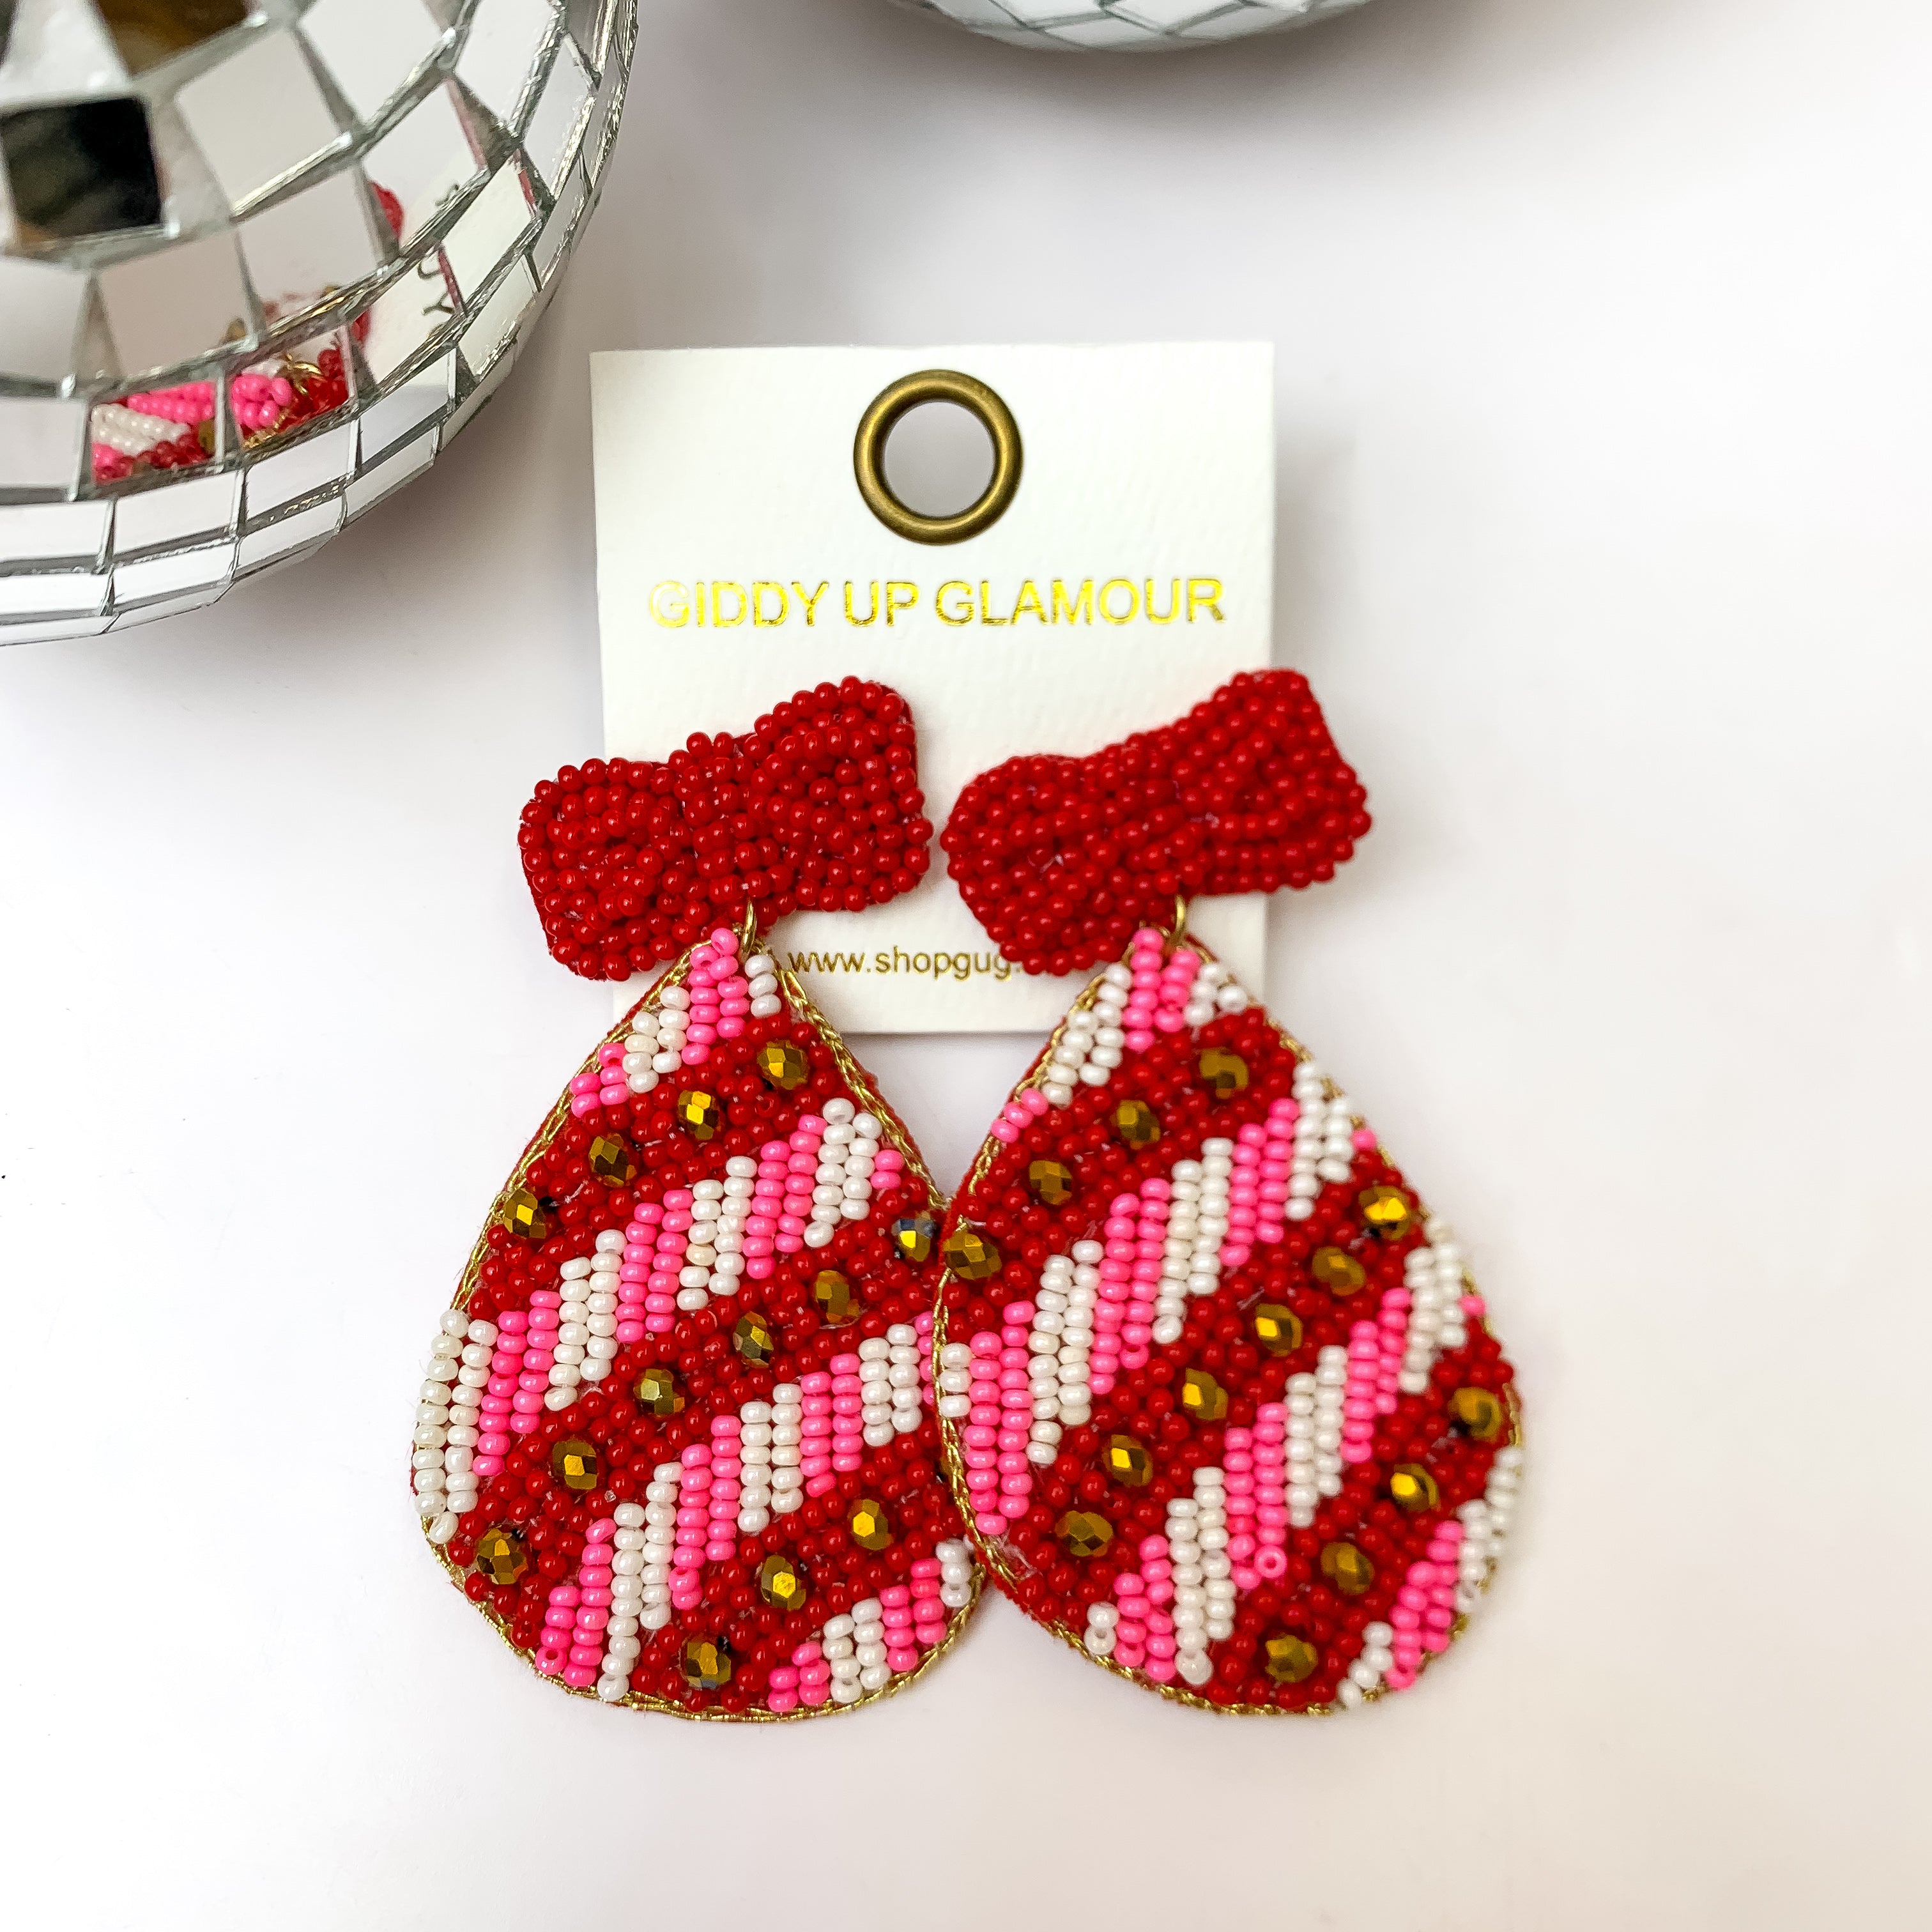 This pair of holiday multi-colored earrings are on an ivory earring card. These earrings are placed on a white background featuring disco balls!